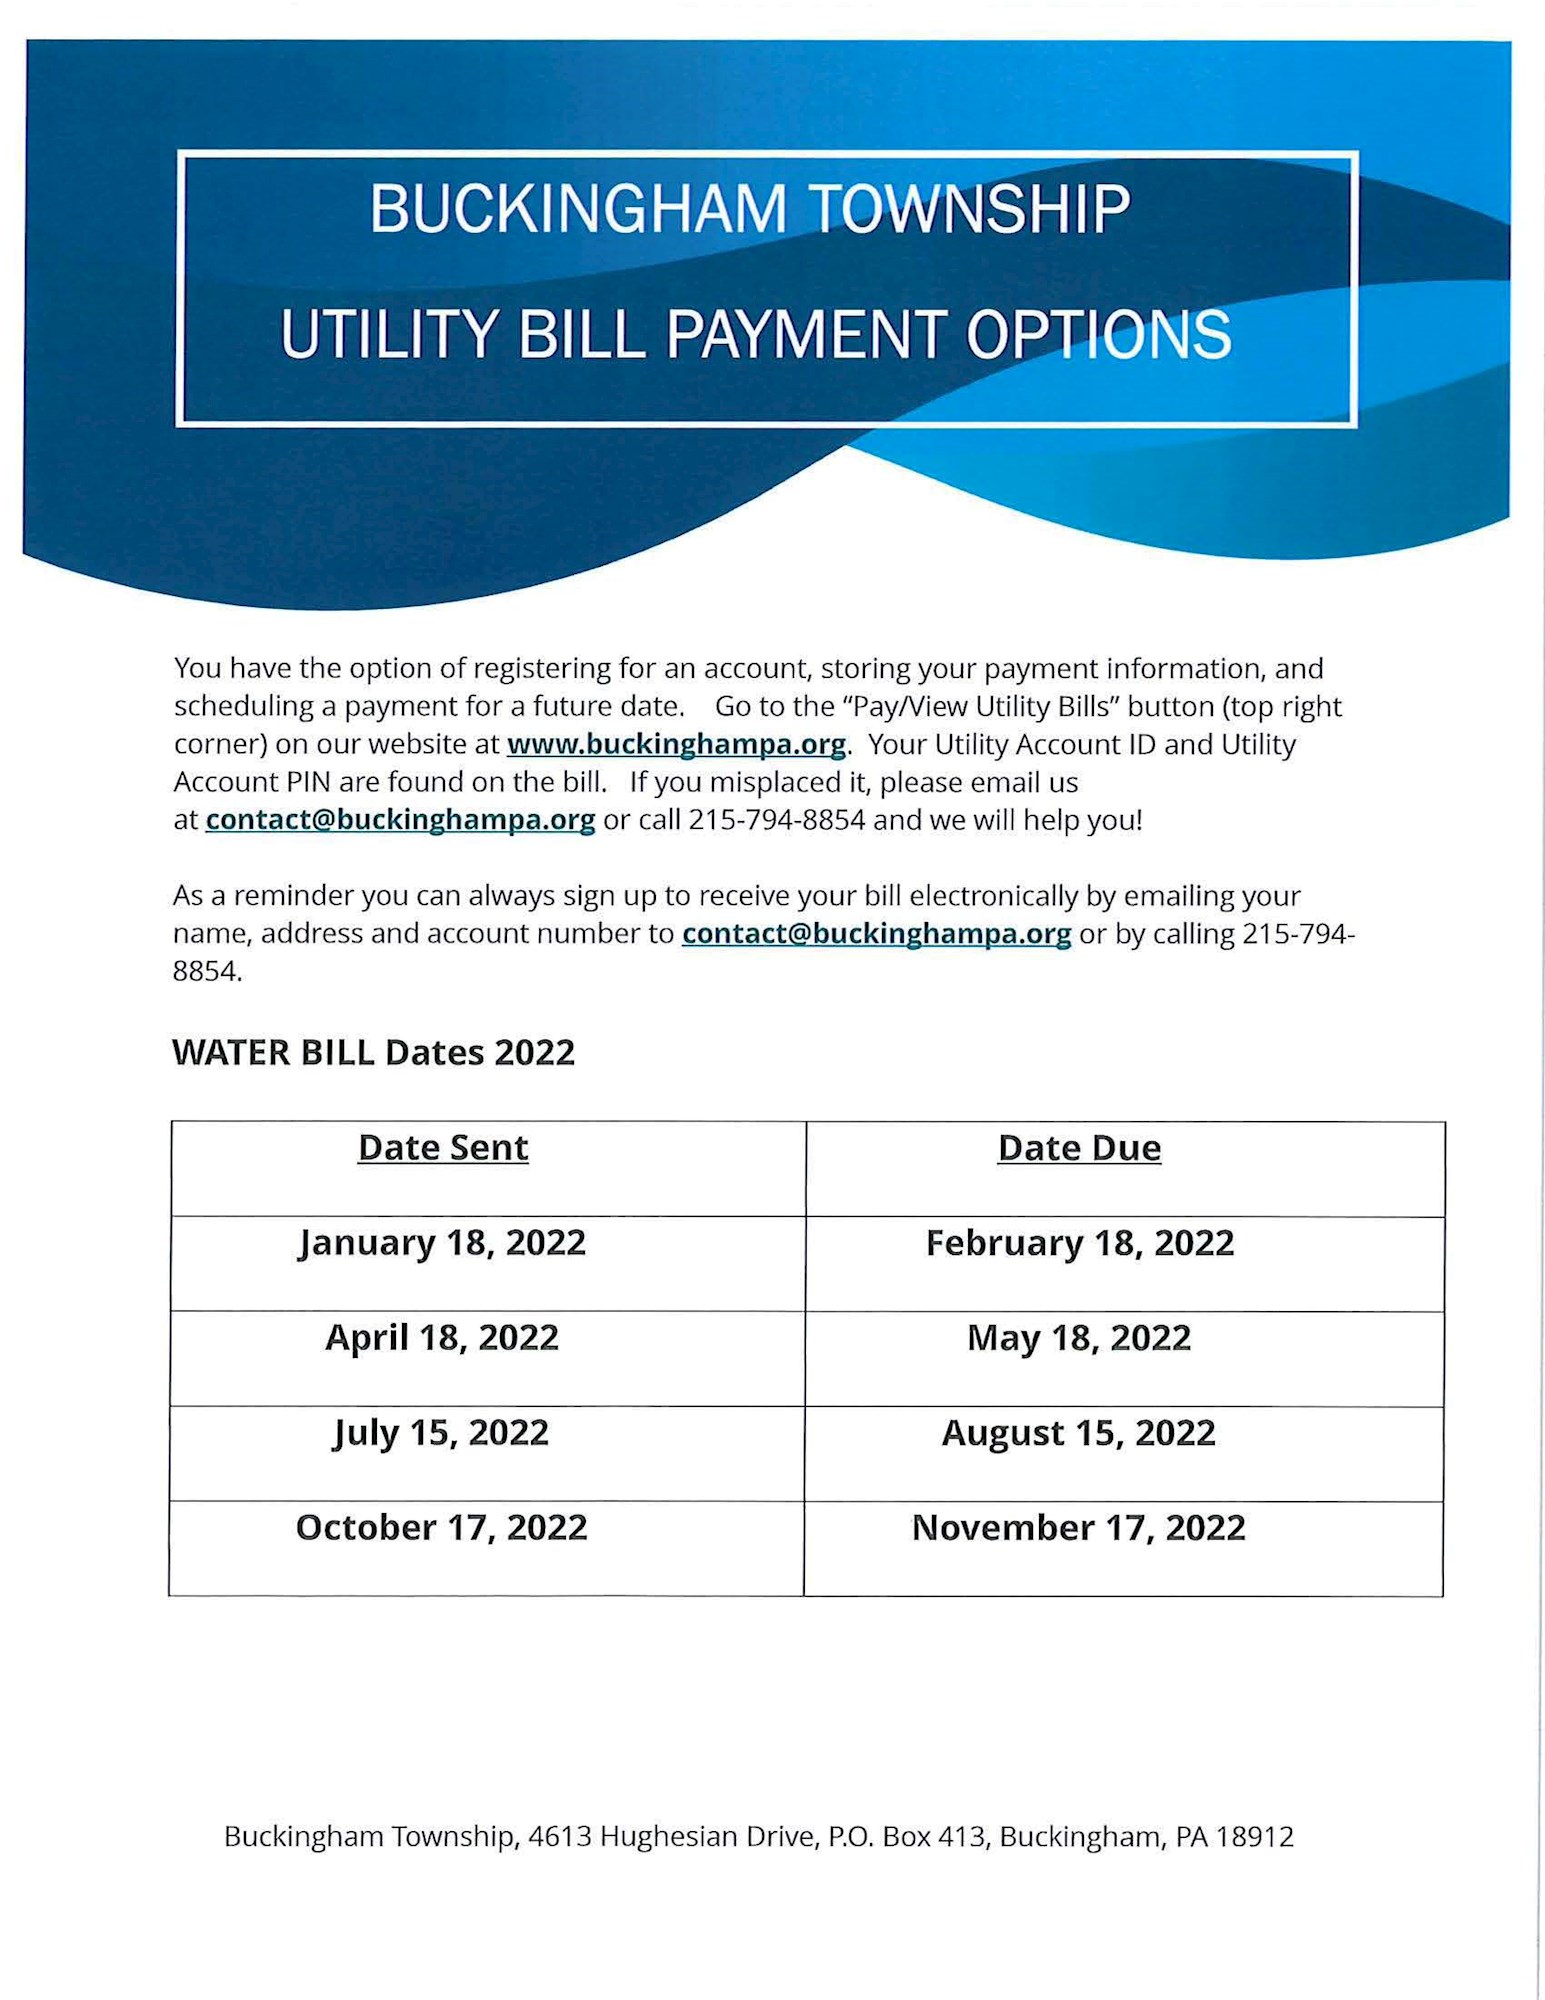 Utility Bill Payment Options 2022